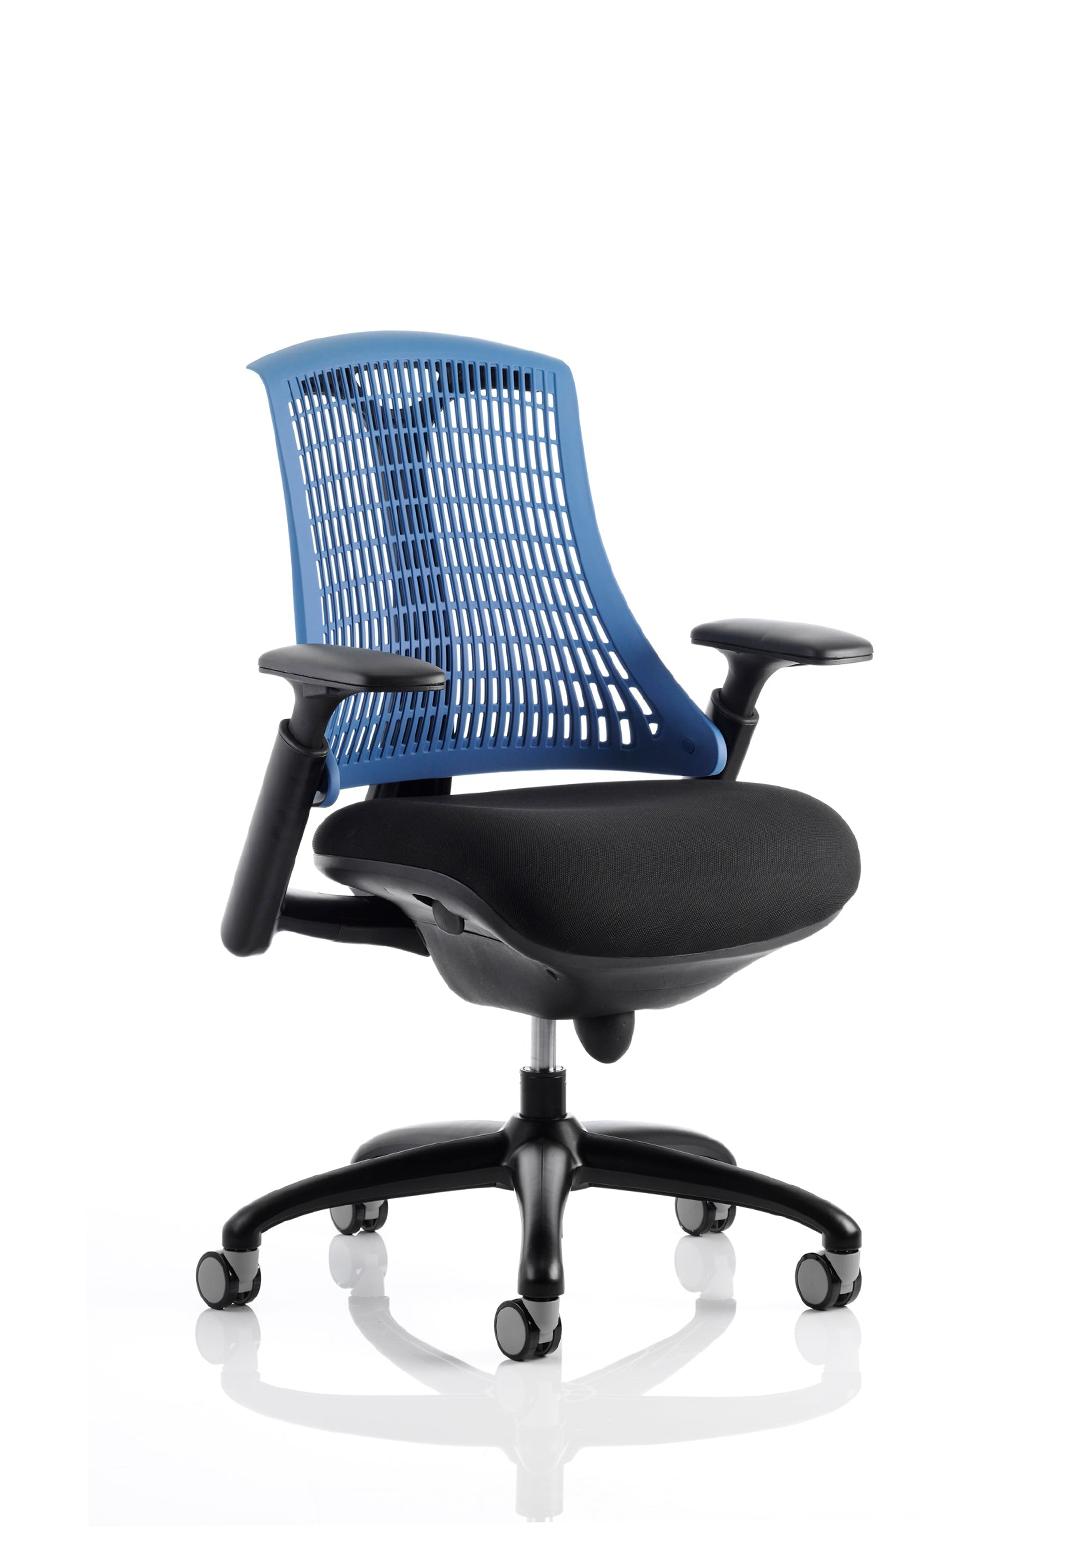 Flex with Black Frame Home Office Chair | Home Office Furniture | Ergonomic Office Chair | Ergonomic Furniture | Office Chair | Swivel Chair